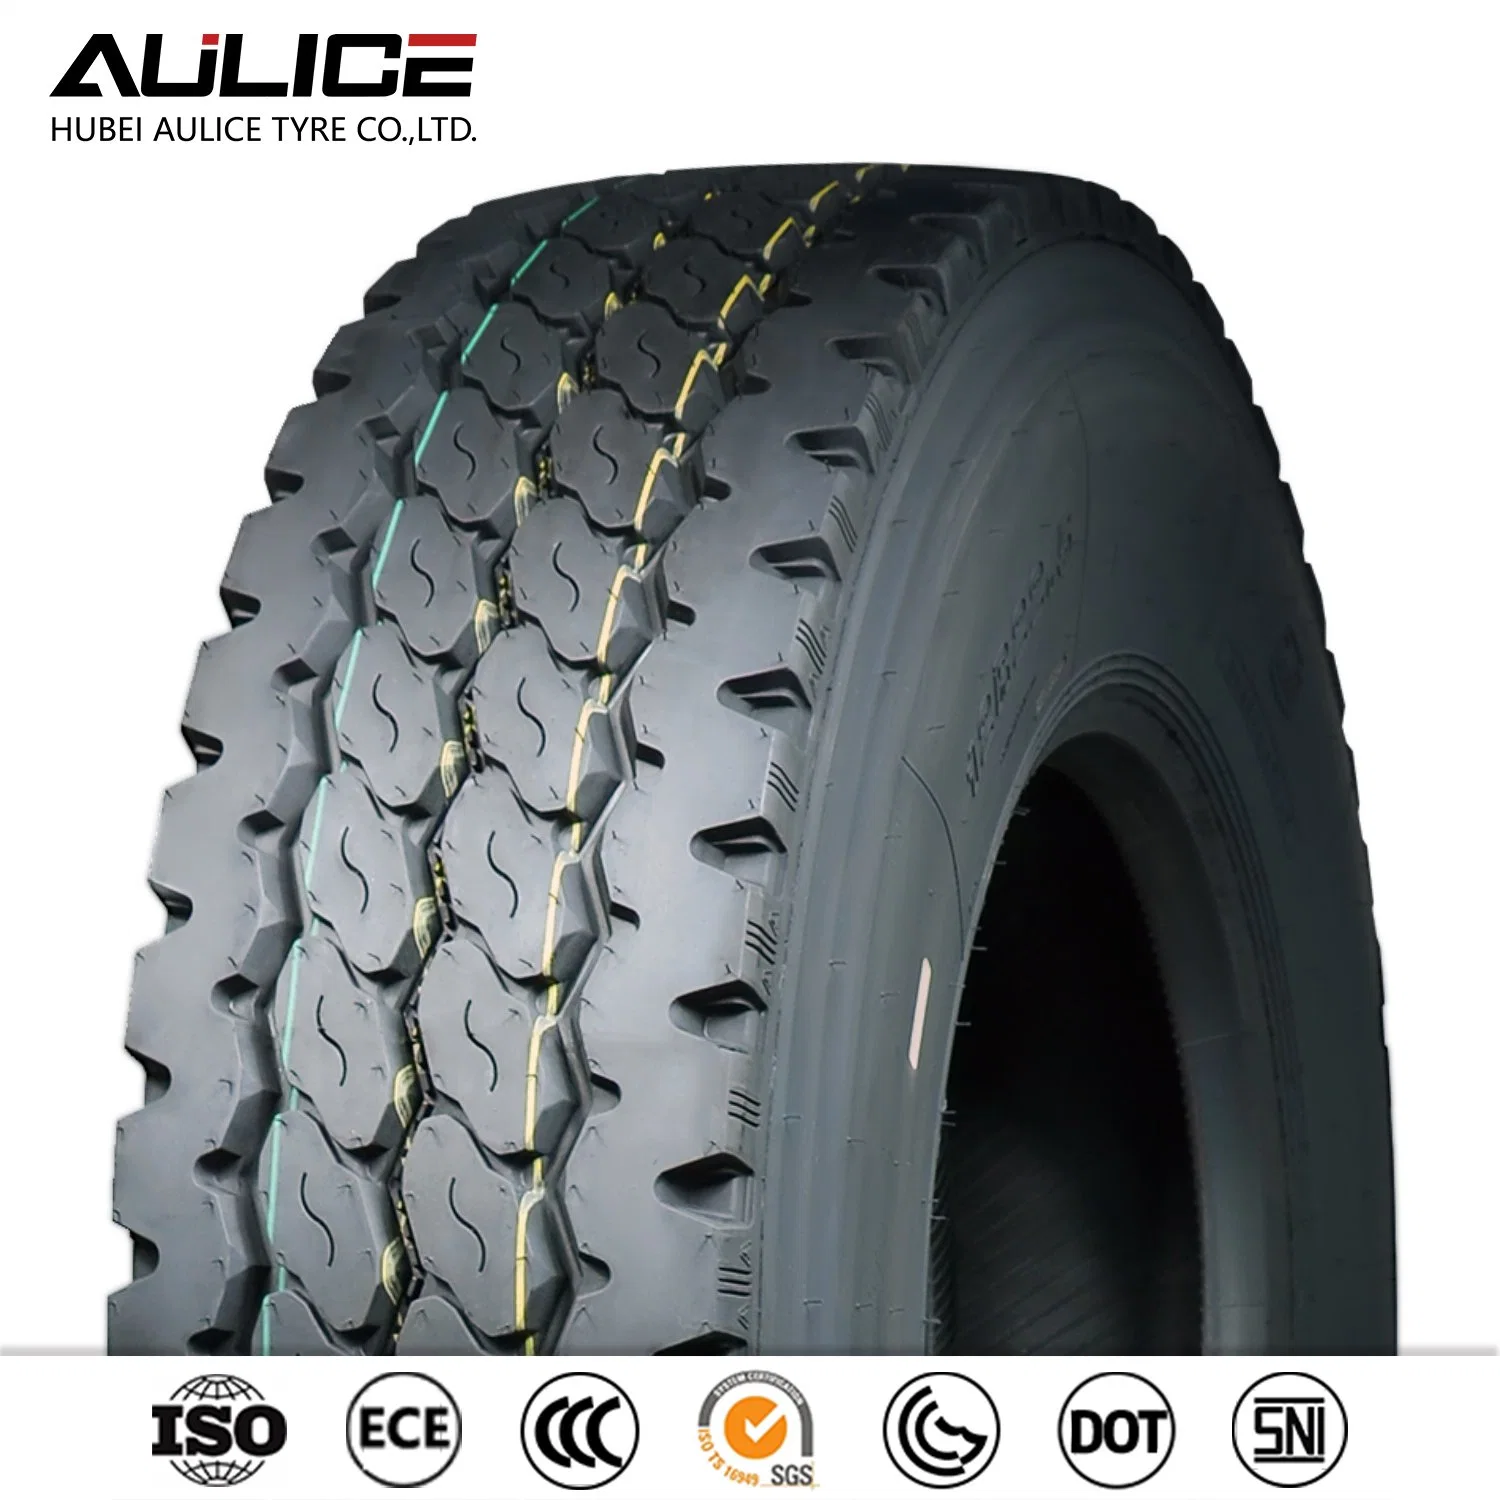 All steel radial truck tire 13R22.5 11R22.5 AR869 top tubeless tire brands AULICE TBR/OTR tyres factory light truck tire